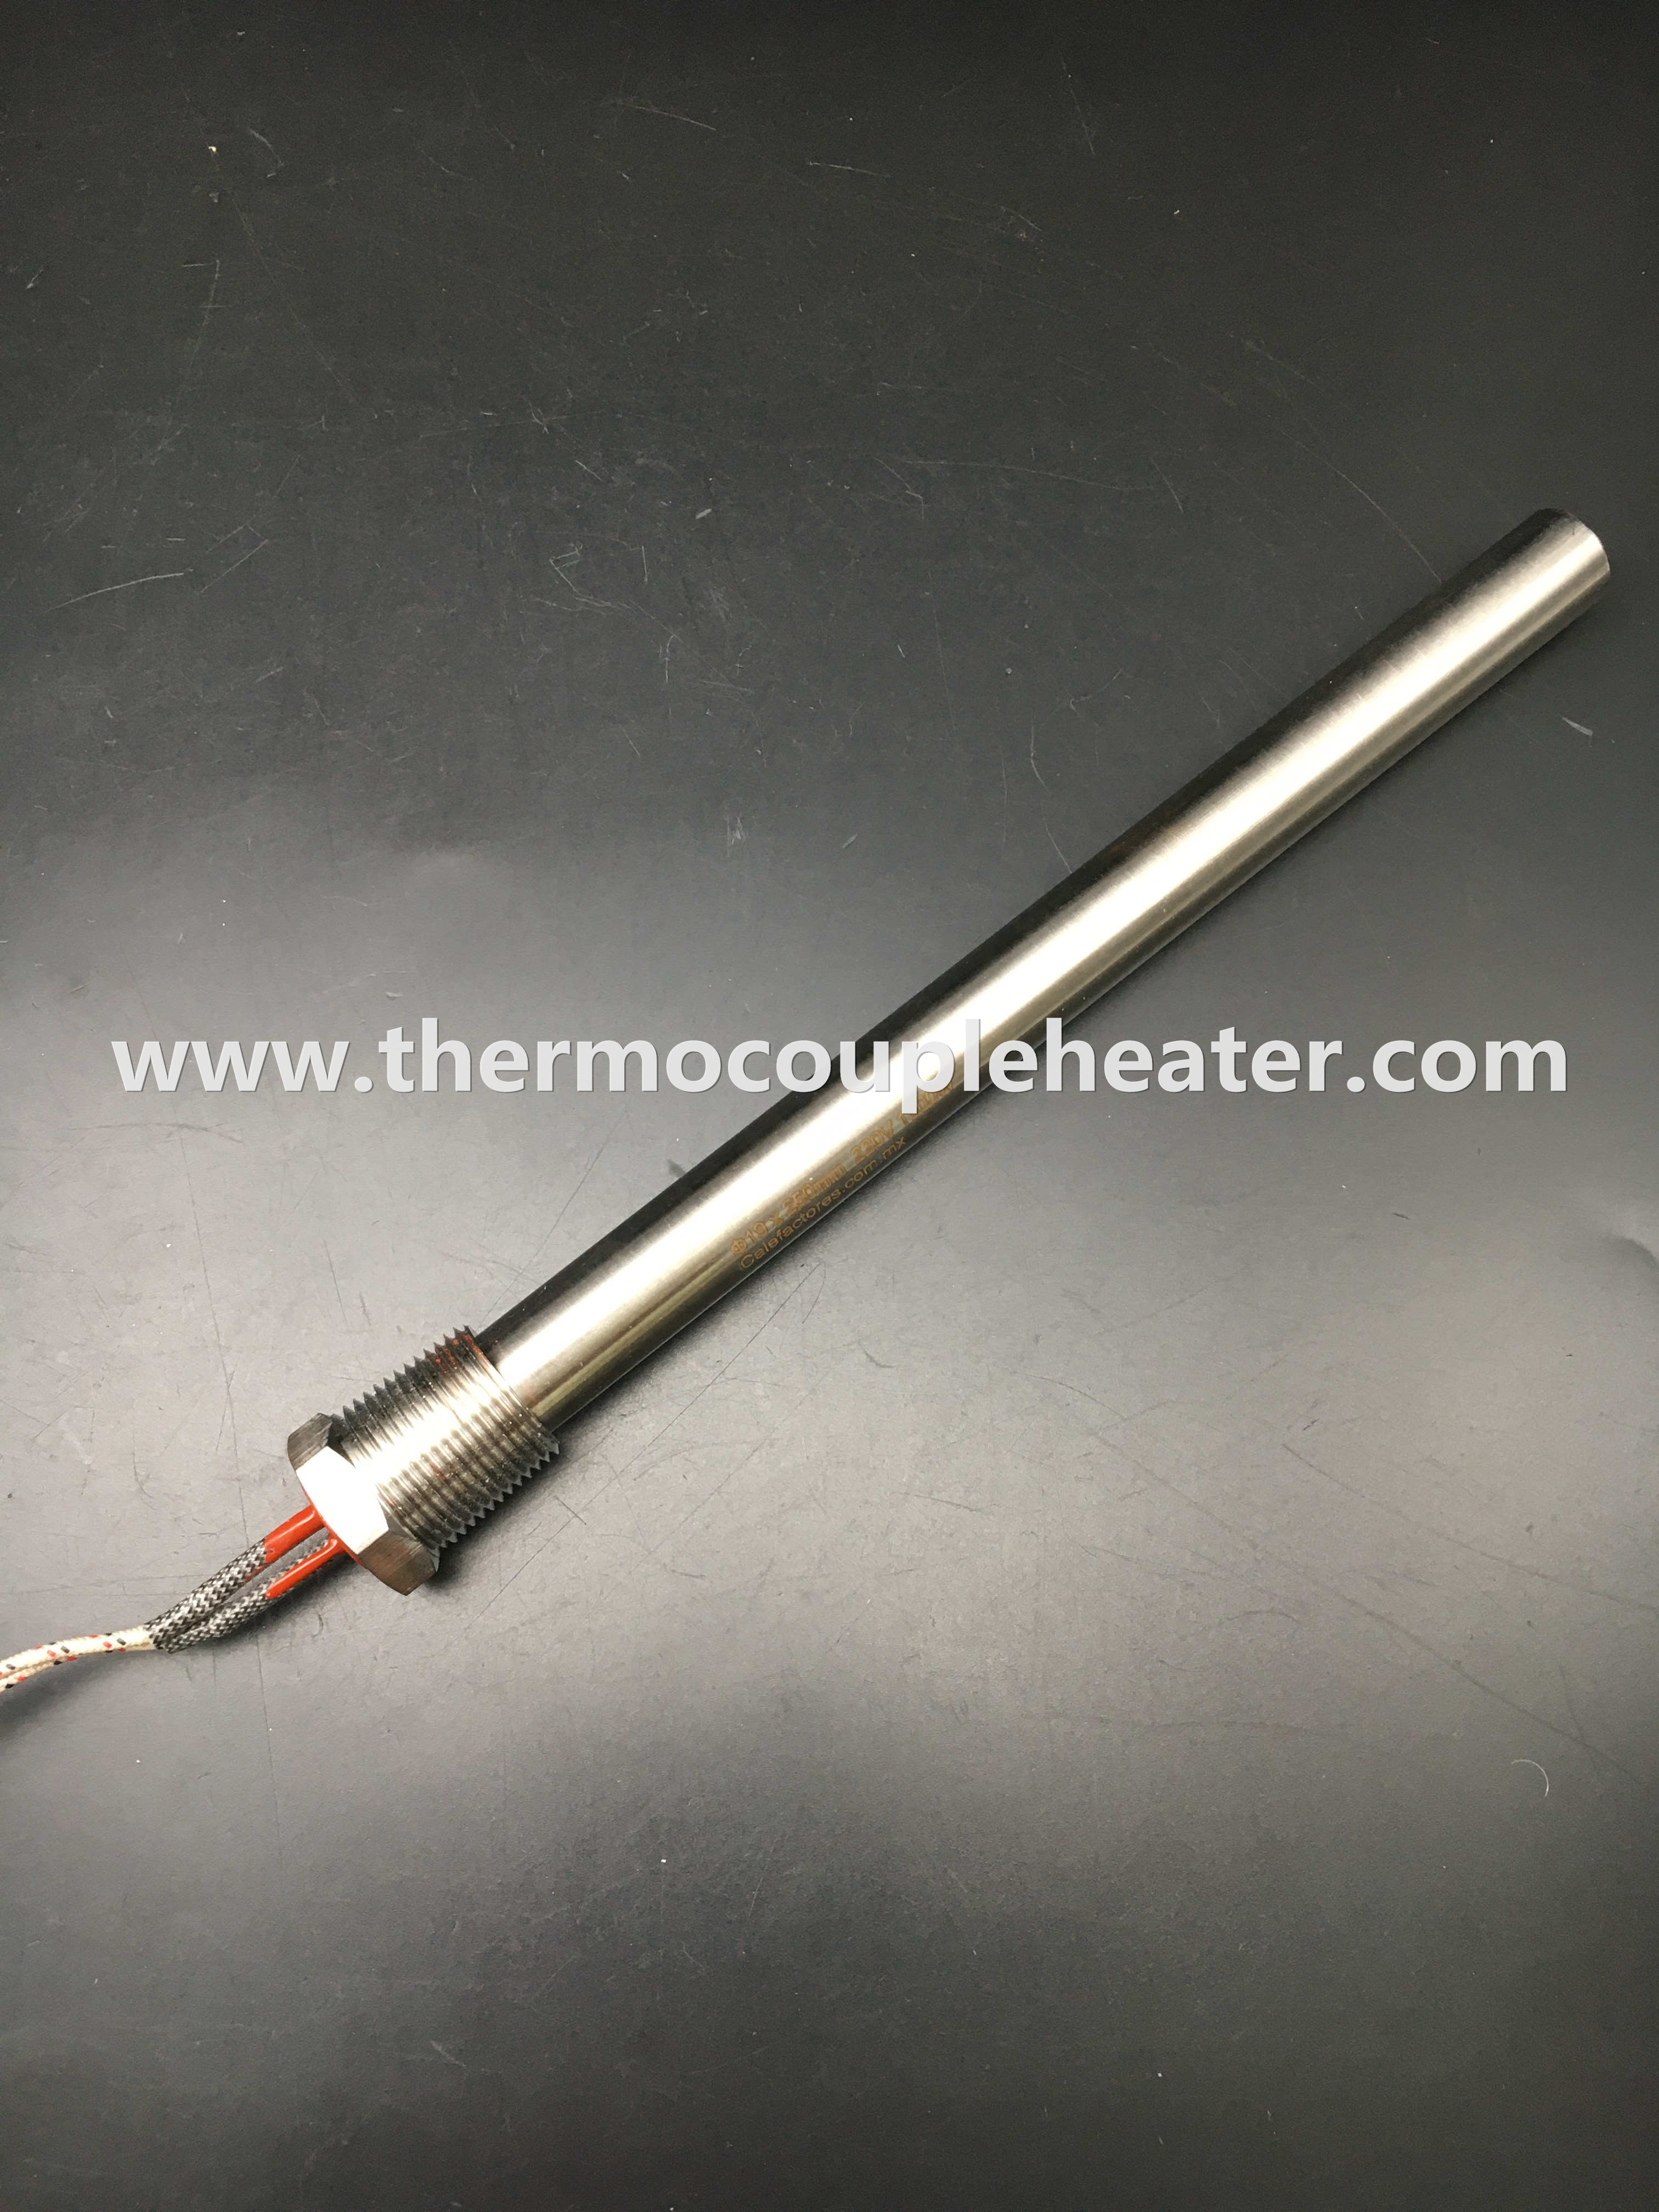 Immersion Cartridge Heater Threaded Replaceable Liquid Heating Elements